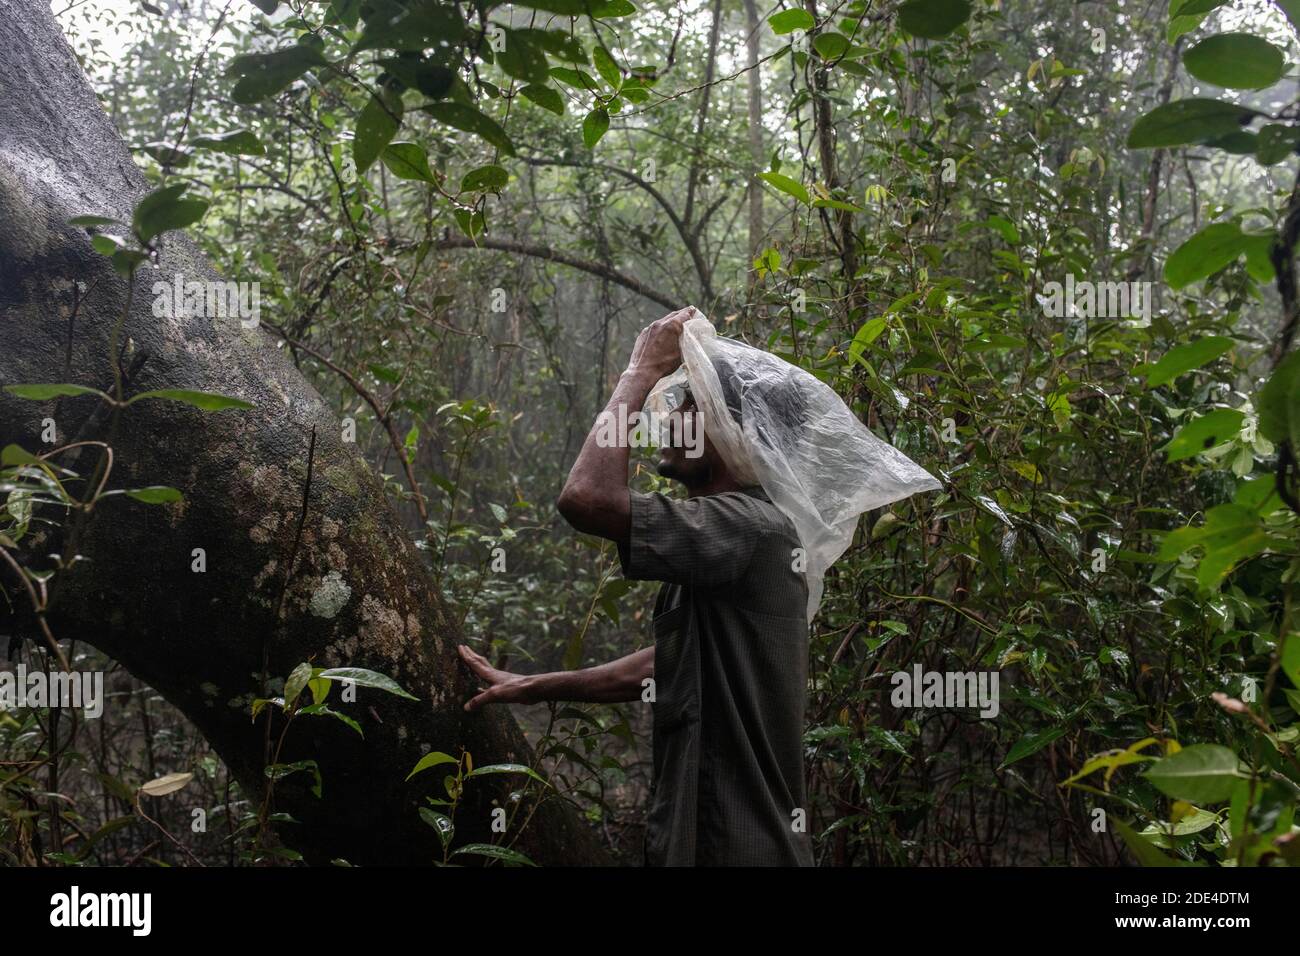 Honey collector waits for his partner at the foot of the tree, he protects himself with a plastic sheet, Mongla, Sundarbans, Bangladesh Stock Photo